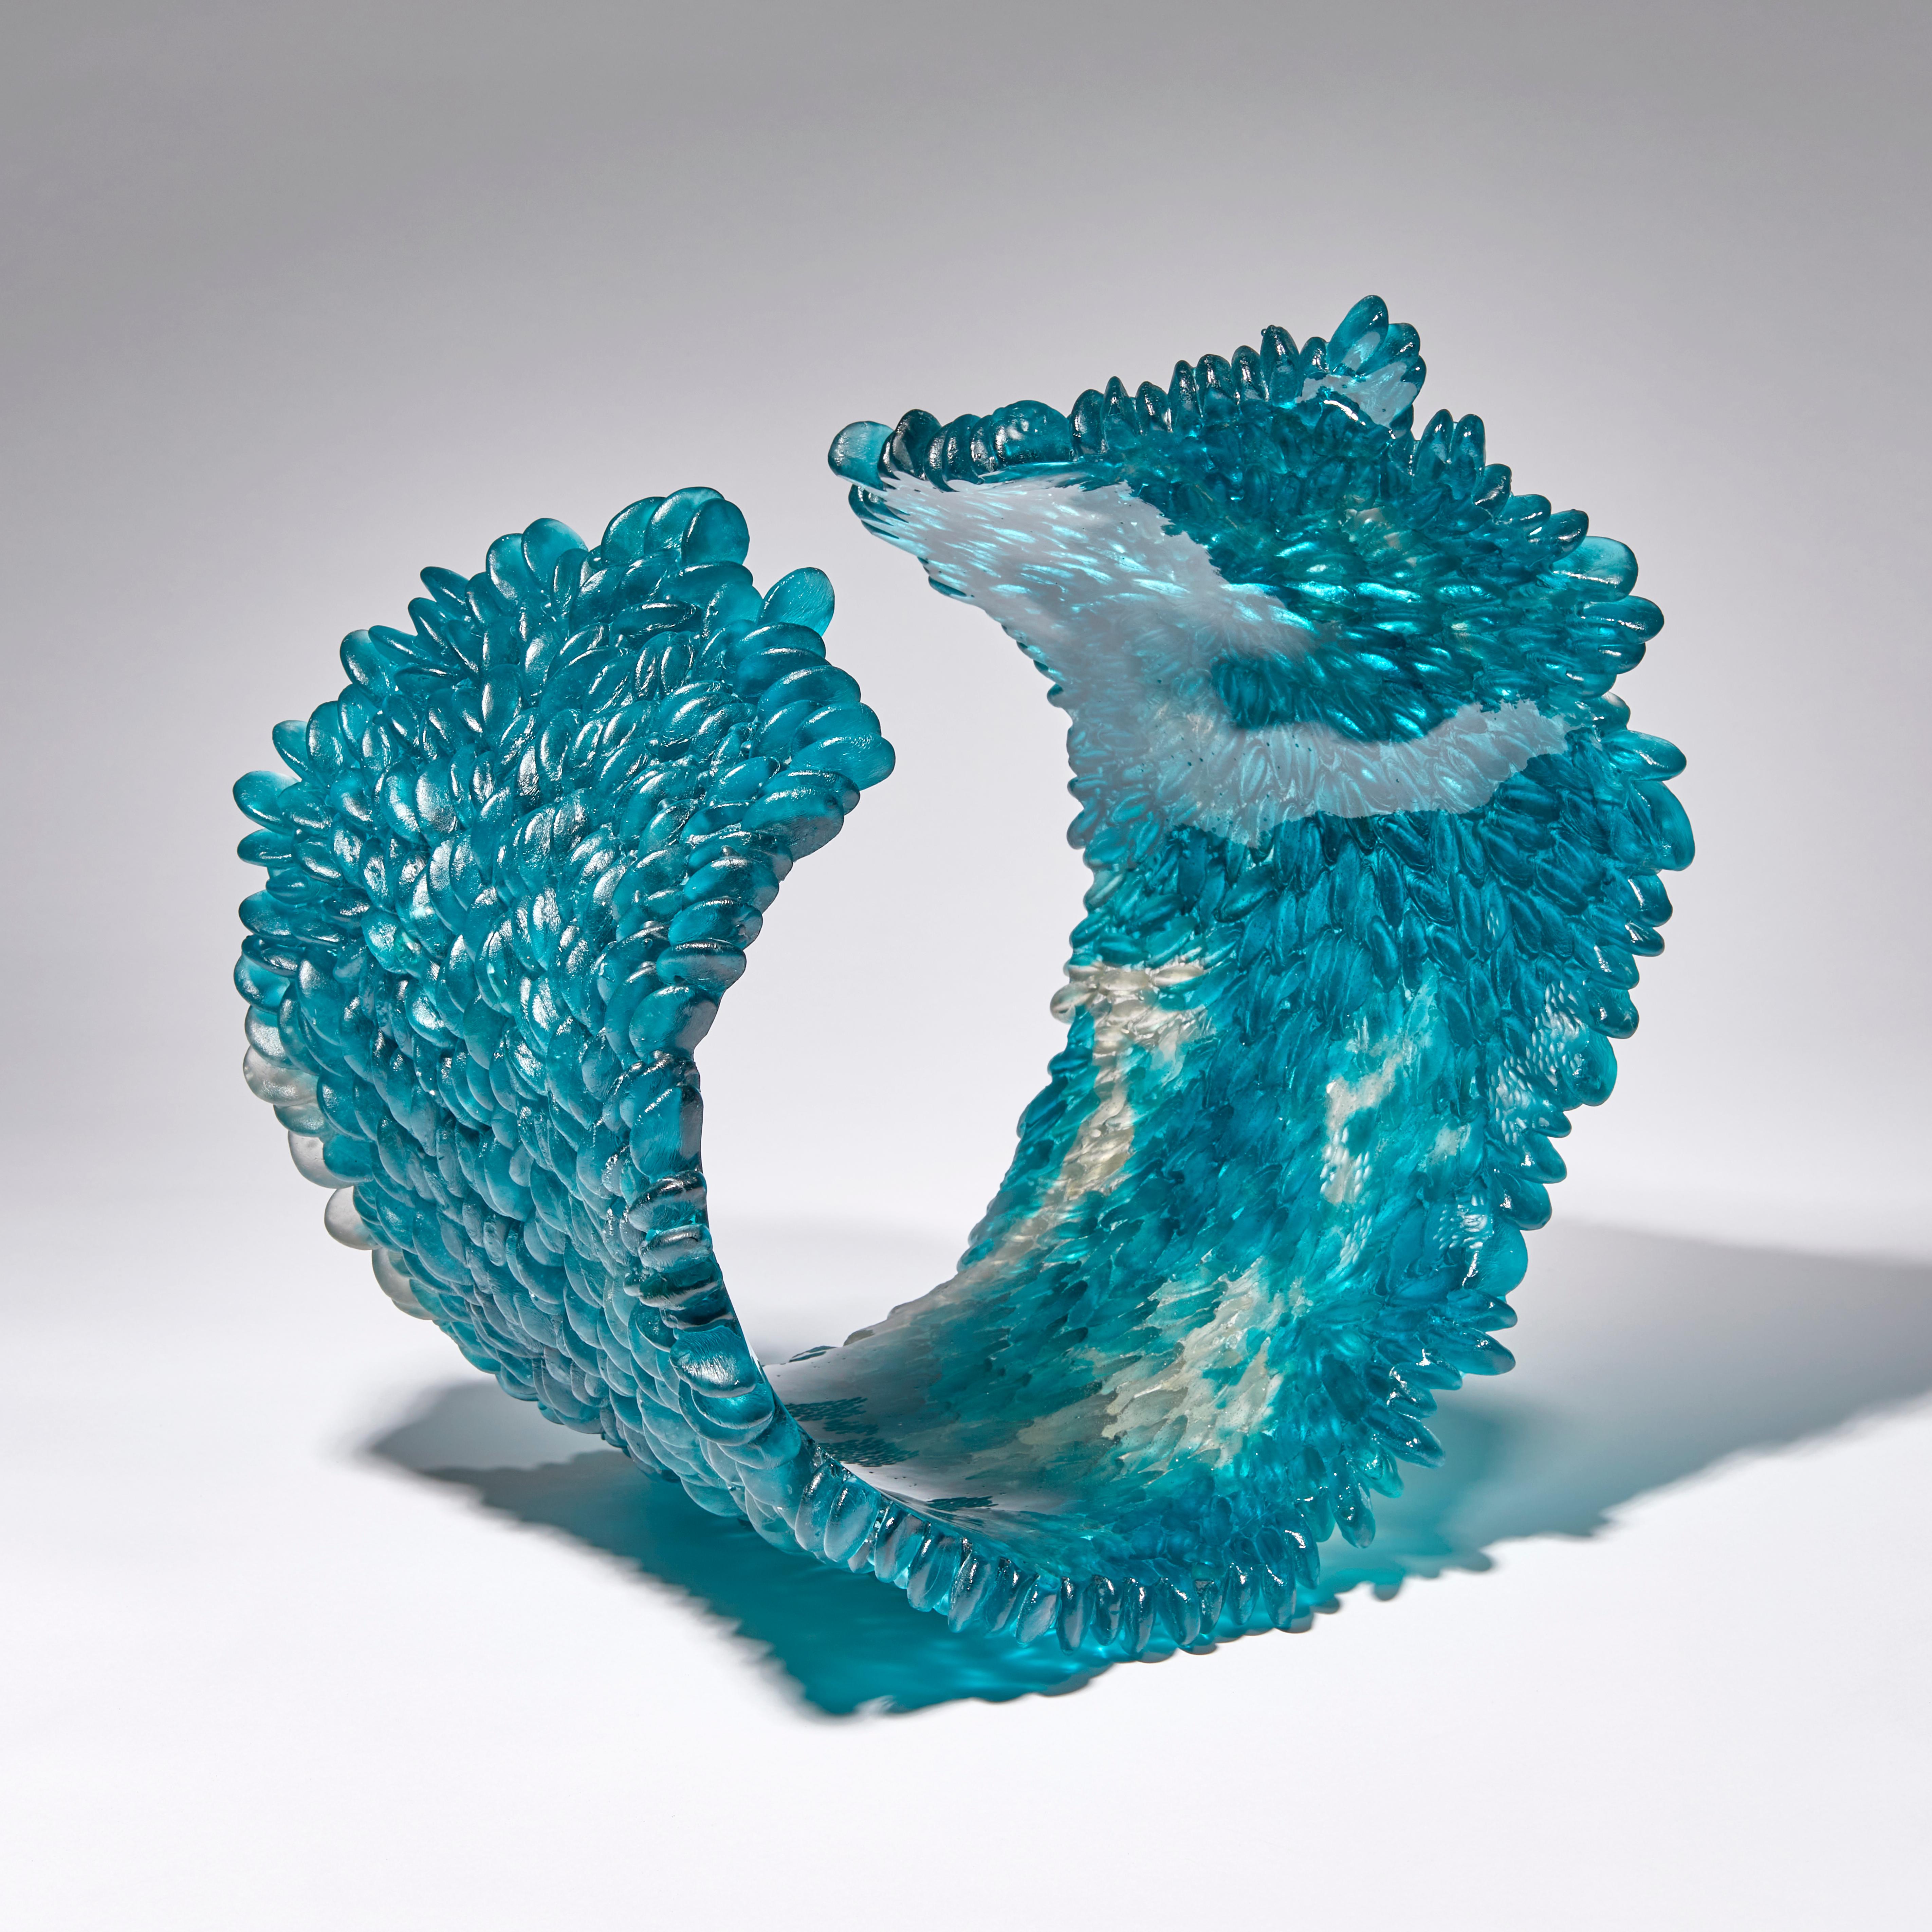 Curled over V is a unique textured cast glass sculpture in teal blue or deep aquamarine and grey by the British artist Nina Casson McGarva.

Casson McGarva firstly casts her glass in a flat mould where she introduces all of the beautifully